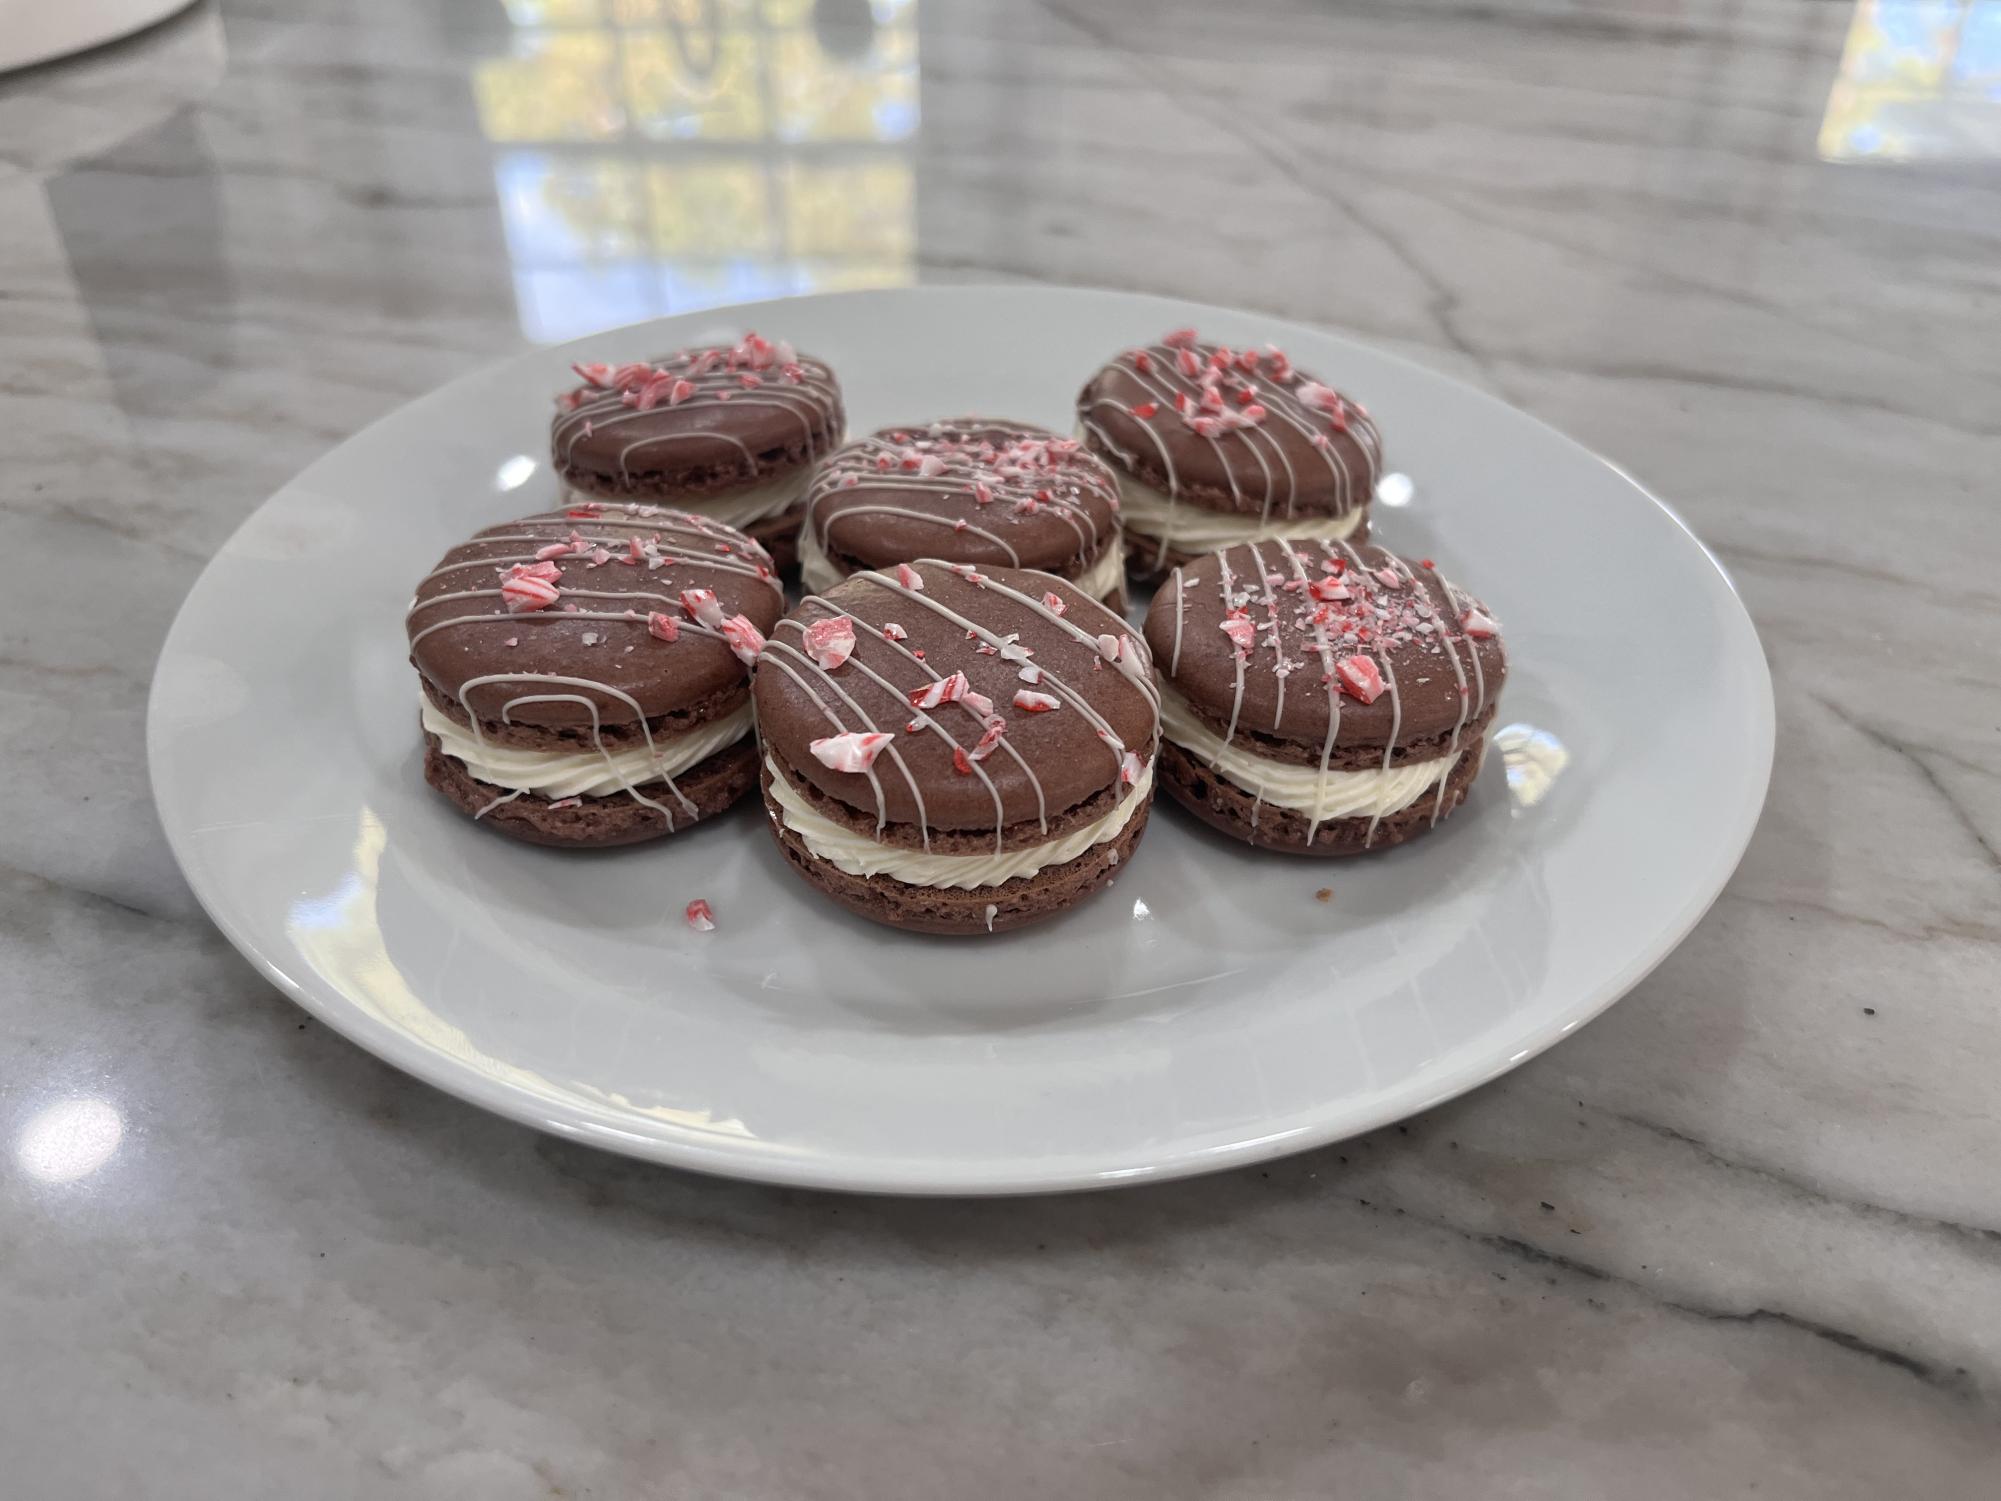 Come learn to bake some holiday macarons with me! These peppermint chocolate macarons are a great treat for any dessert lover.